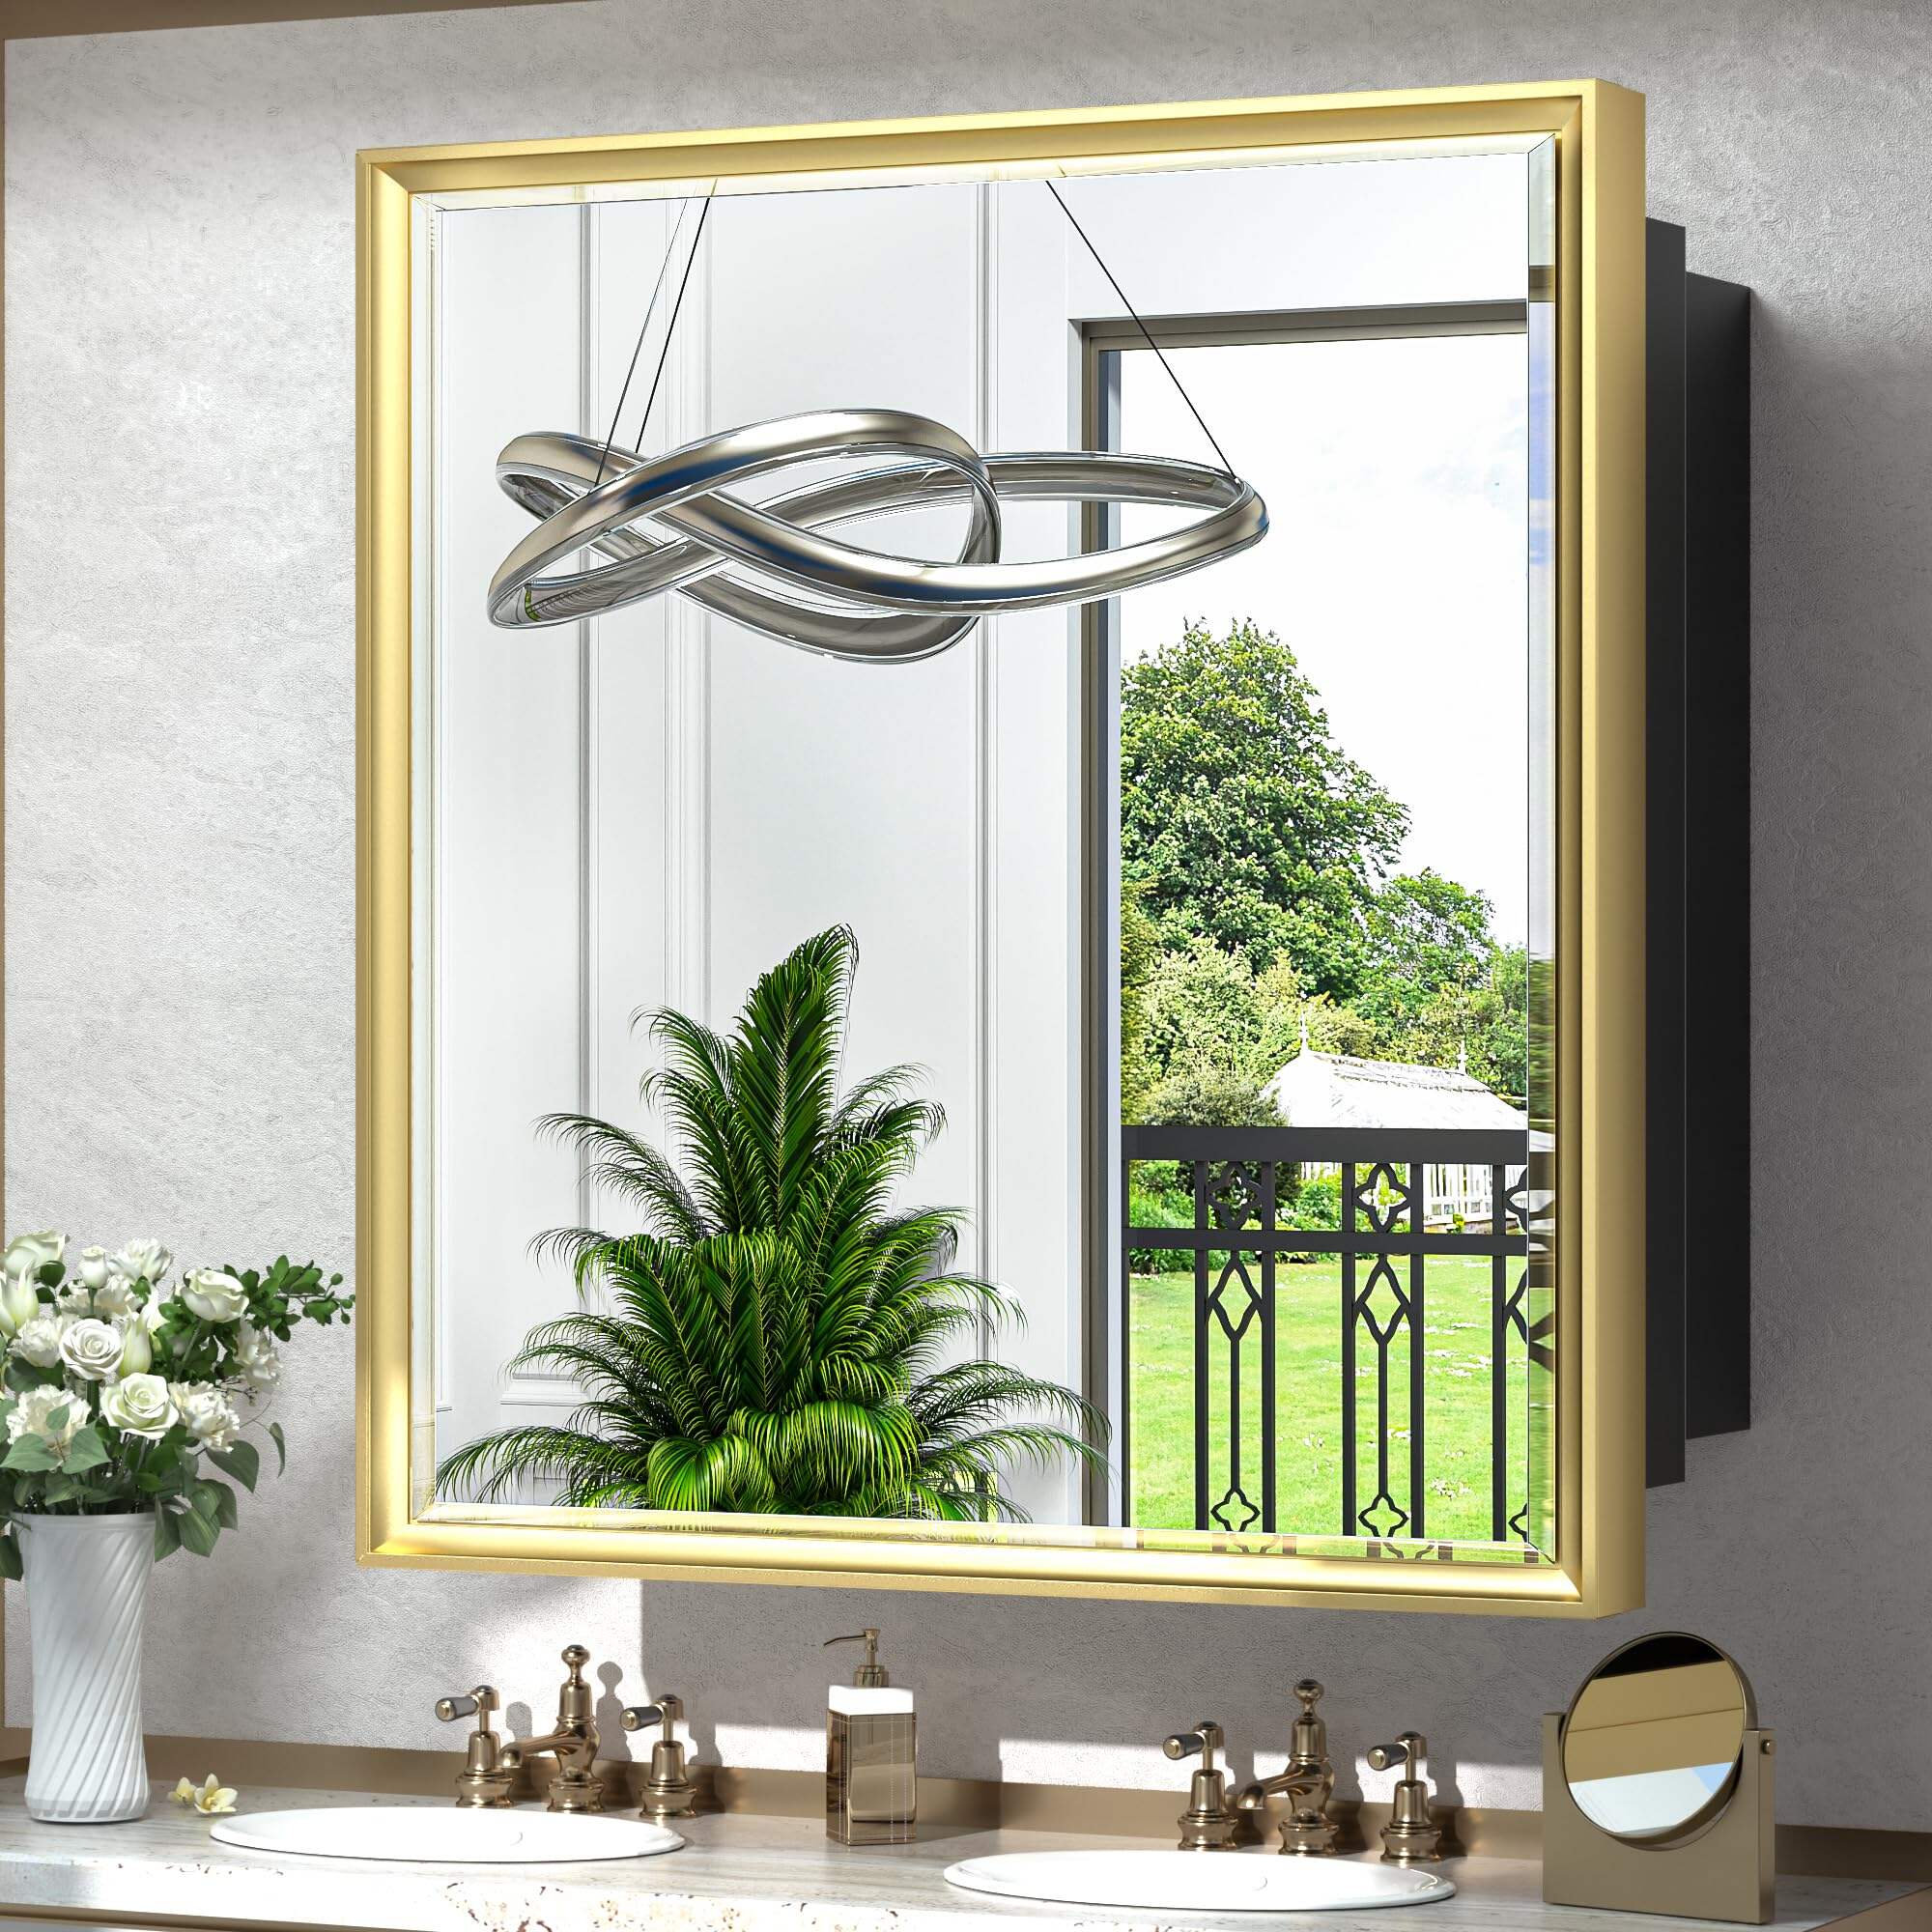 Foshan Haohan Smart Home Co., Ltd.30x32 Medicine Cabinet Bathroom Vanity Mirror Gold Metal Framed Recessed or Surface Wall Mounted with Aluminum Alloy Beveled Edges Design 1 Door for Modern Farmhouse